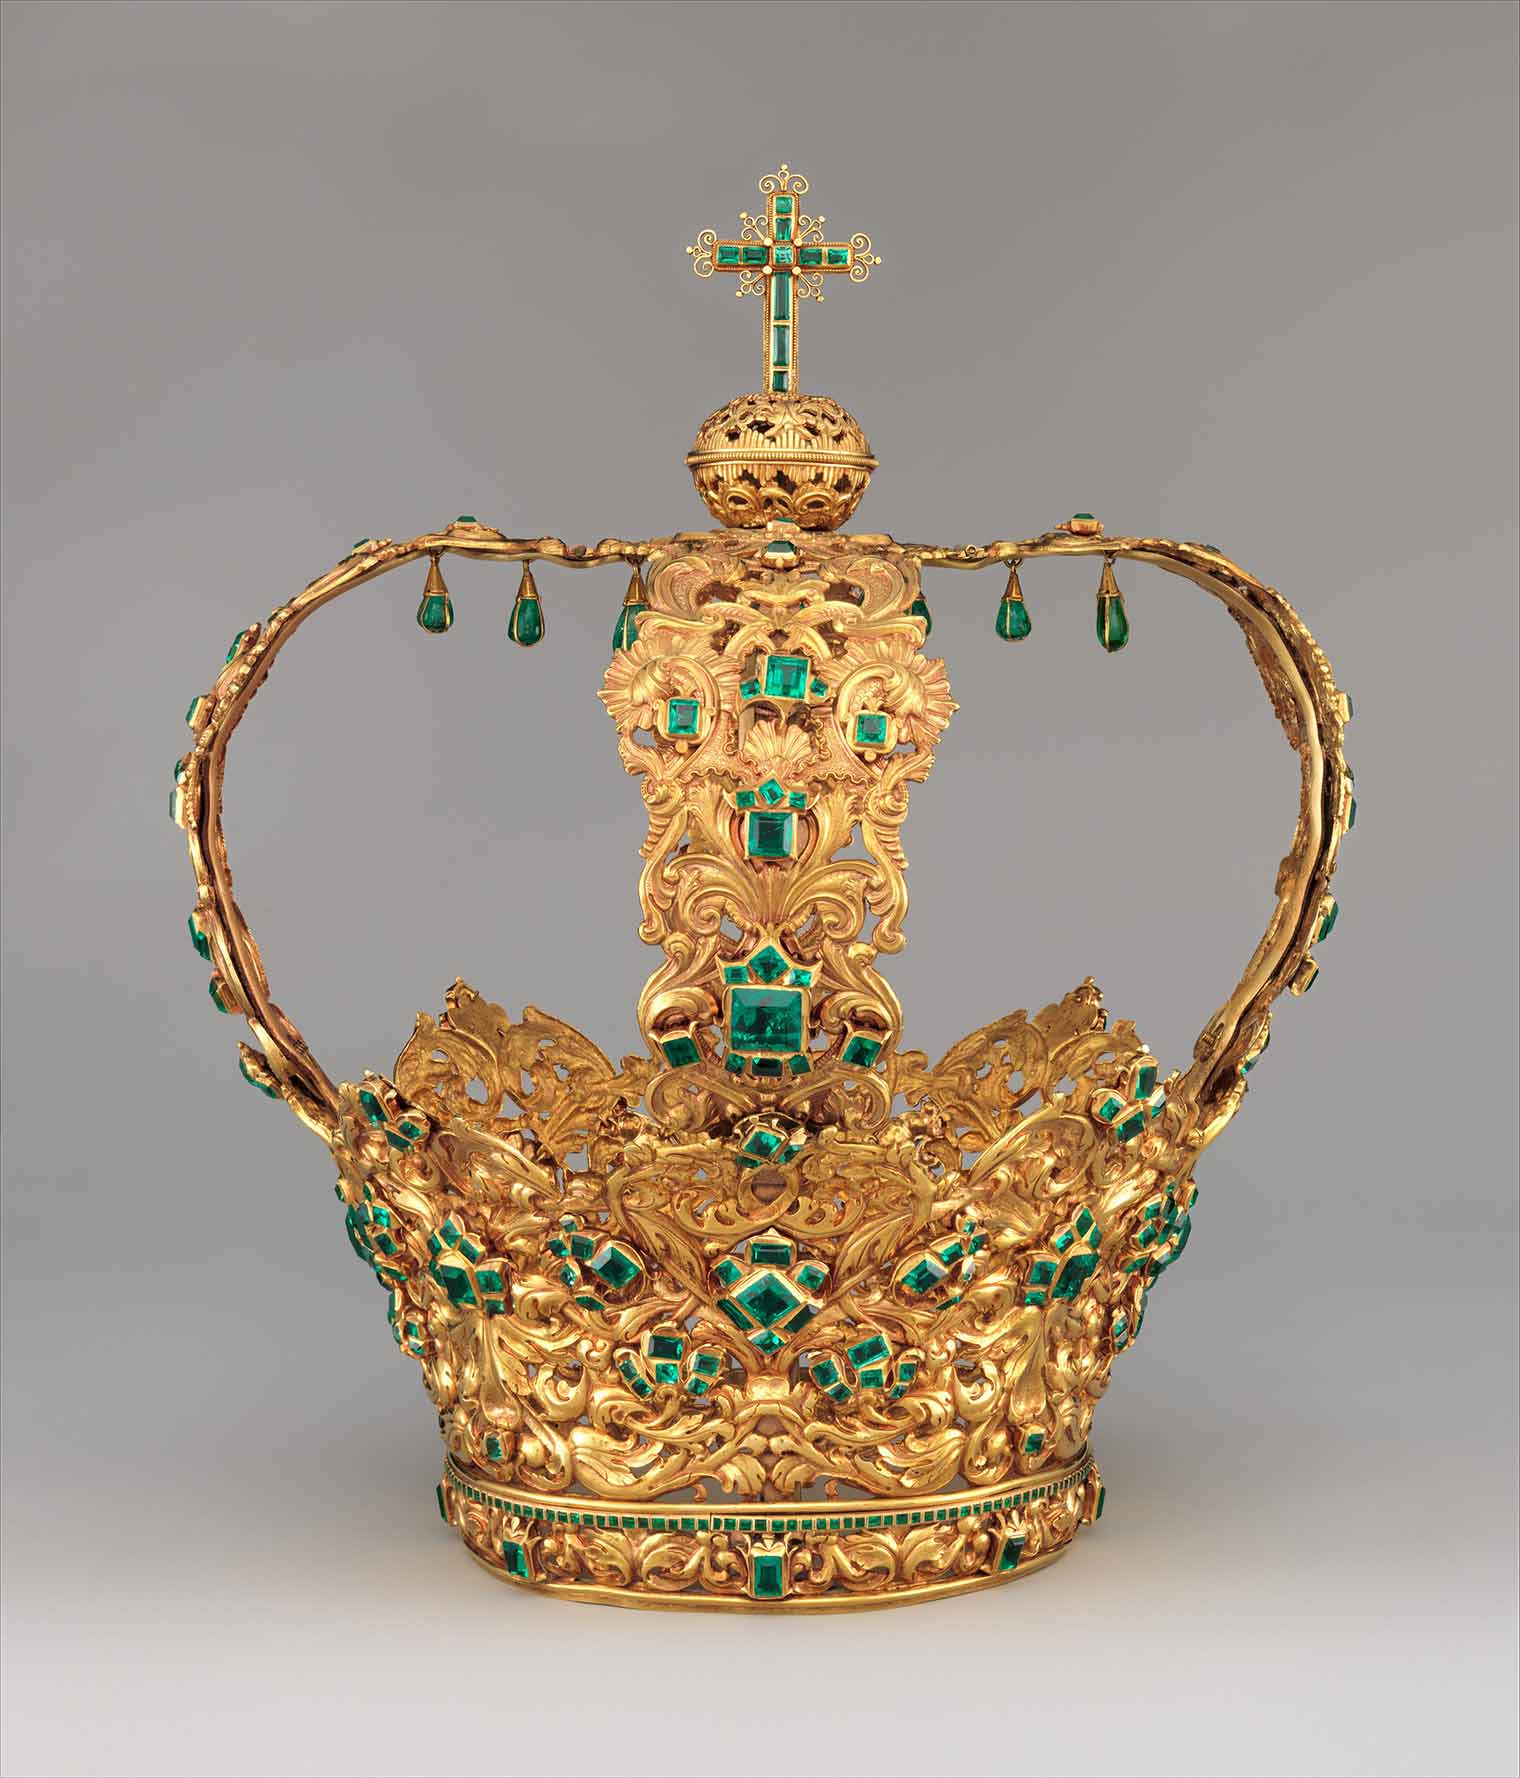 Elaborate golden crown embellished with emeralds with an emerald cross at the top. 